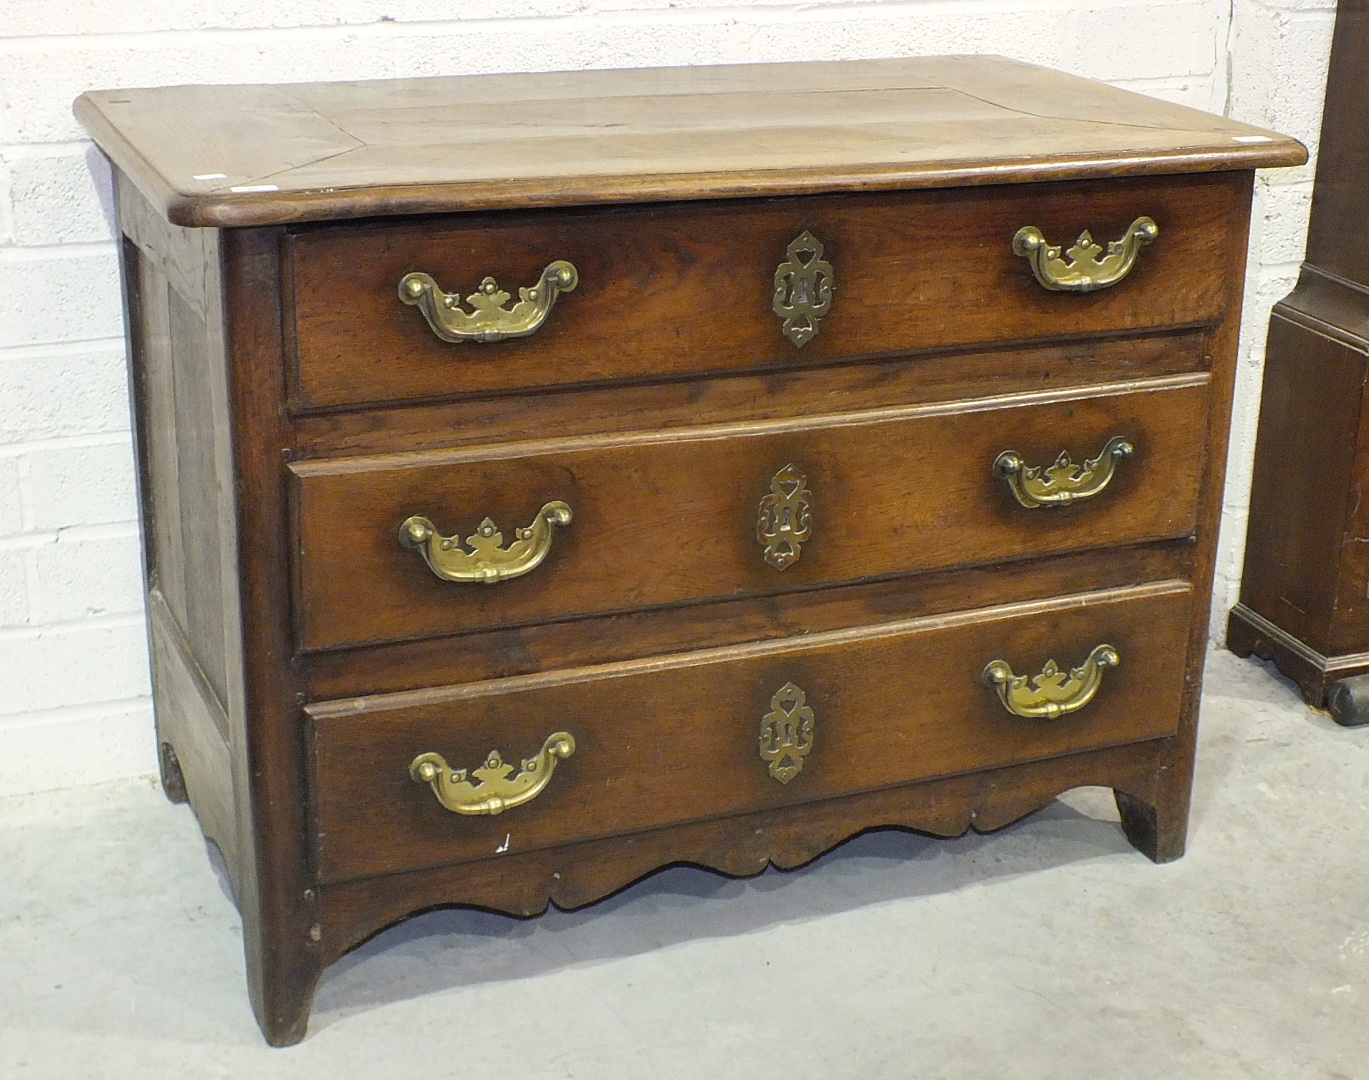 An early-18th century Continental chestnut or oak chest of three long drawers with heavy brass